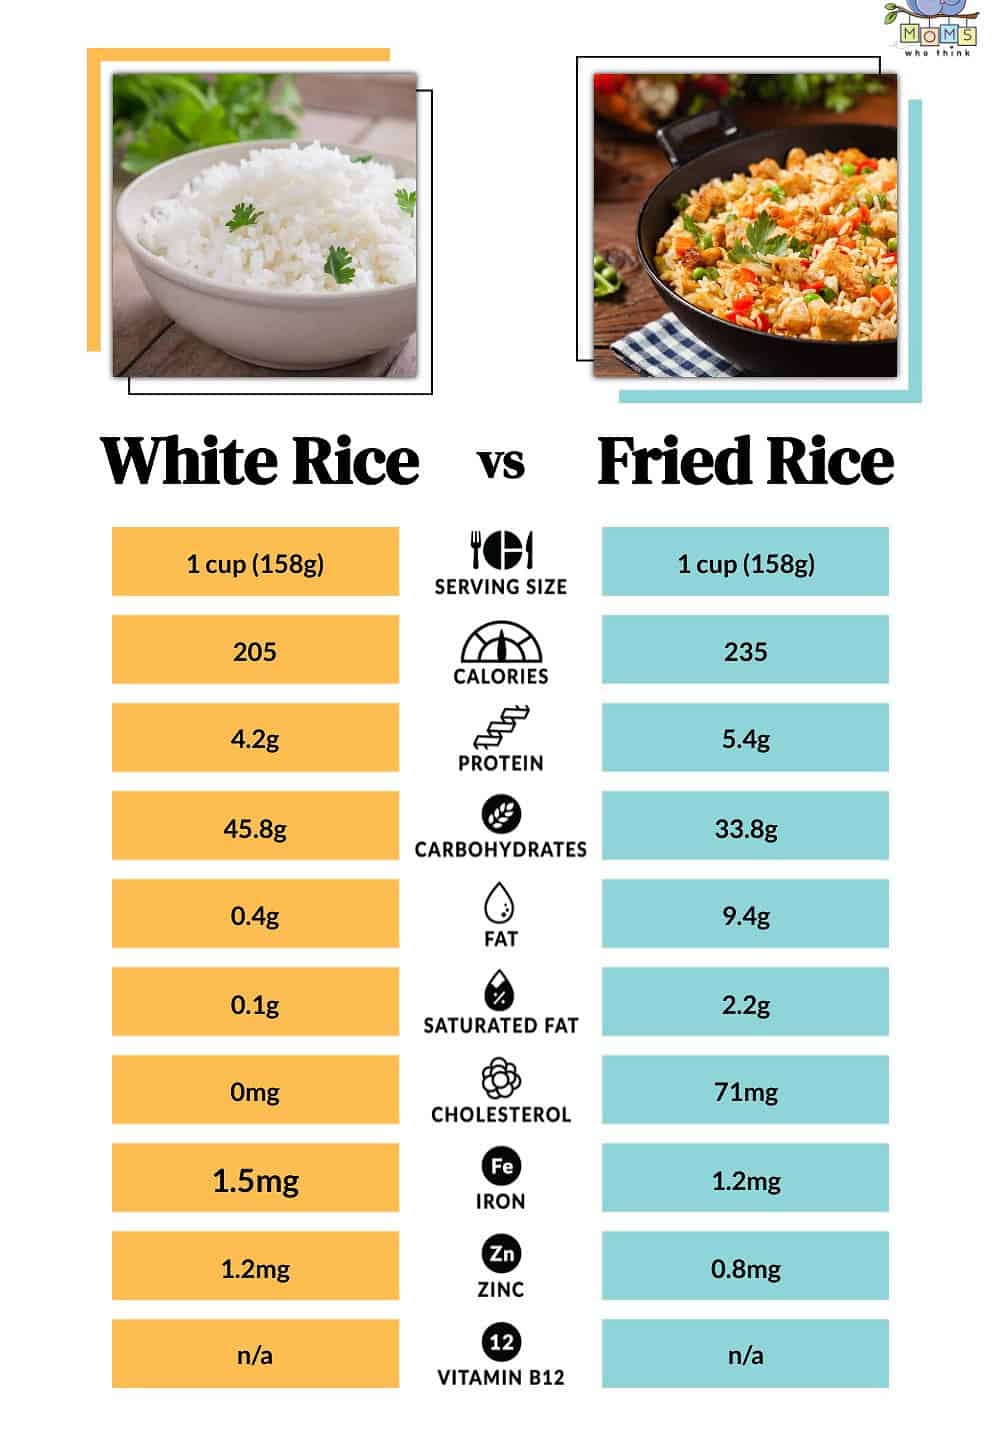 White Rice vs Fried Rice Nutritional Facts